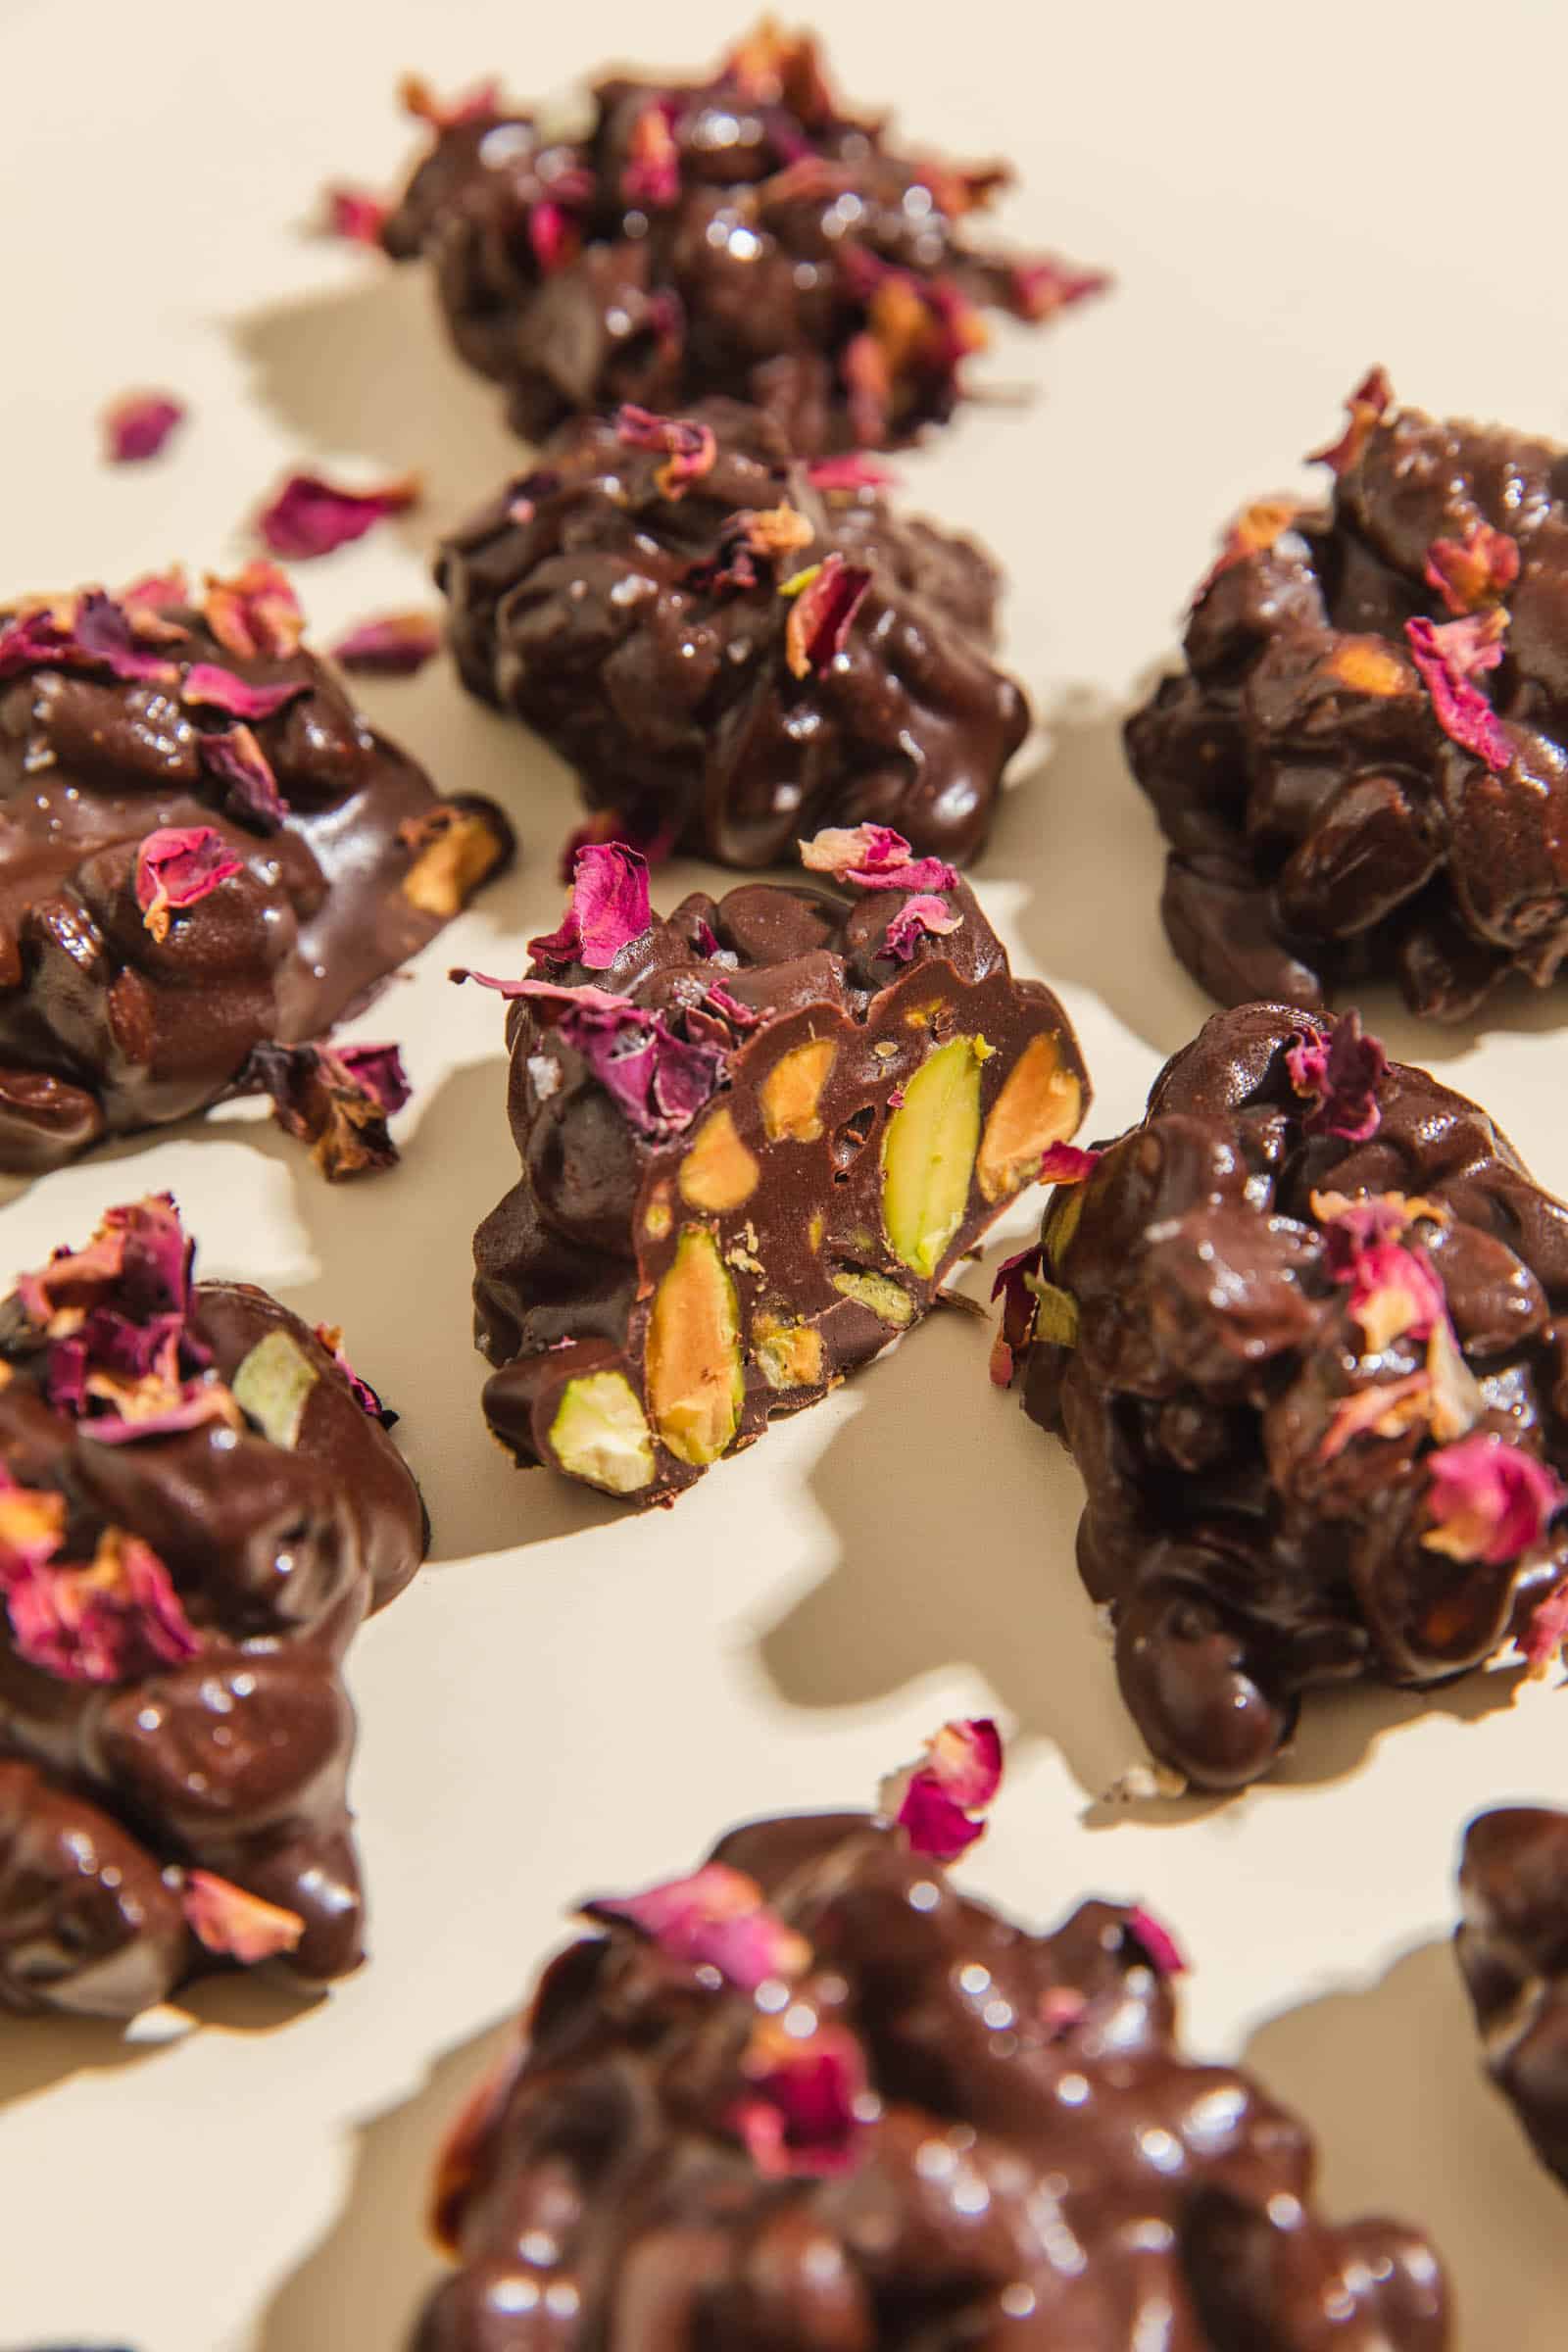 Chocolate pistachio clusters keto snack with rose petals